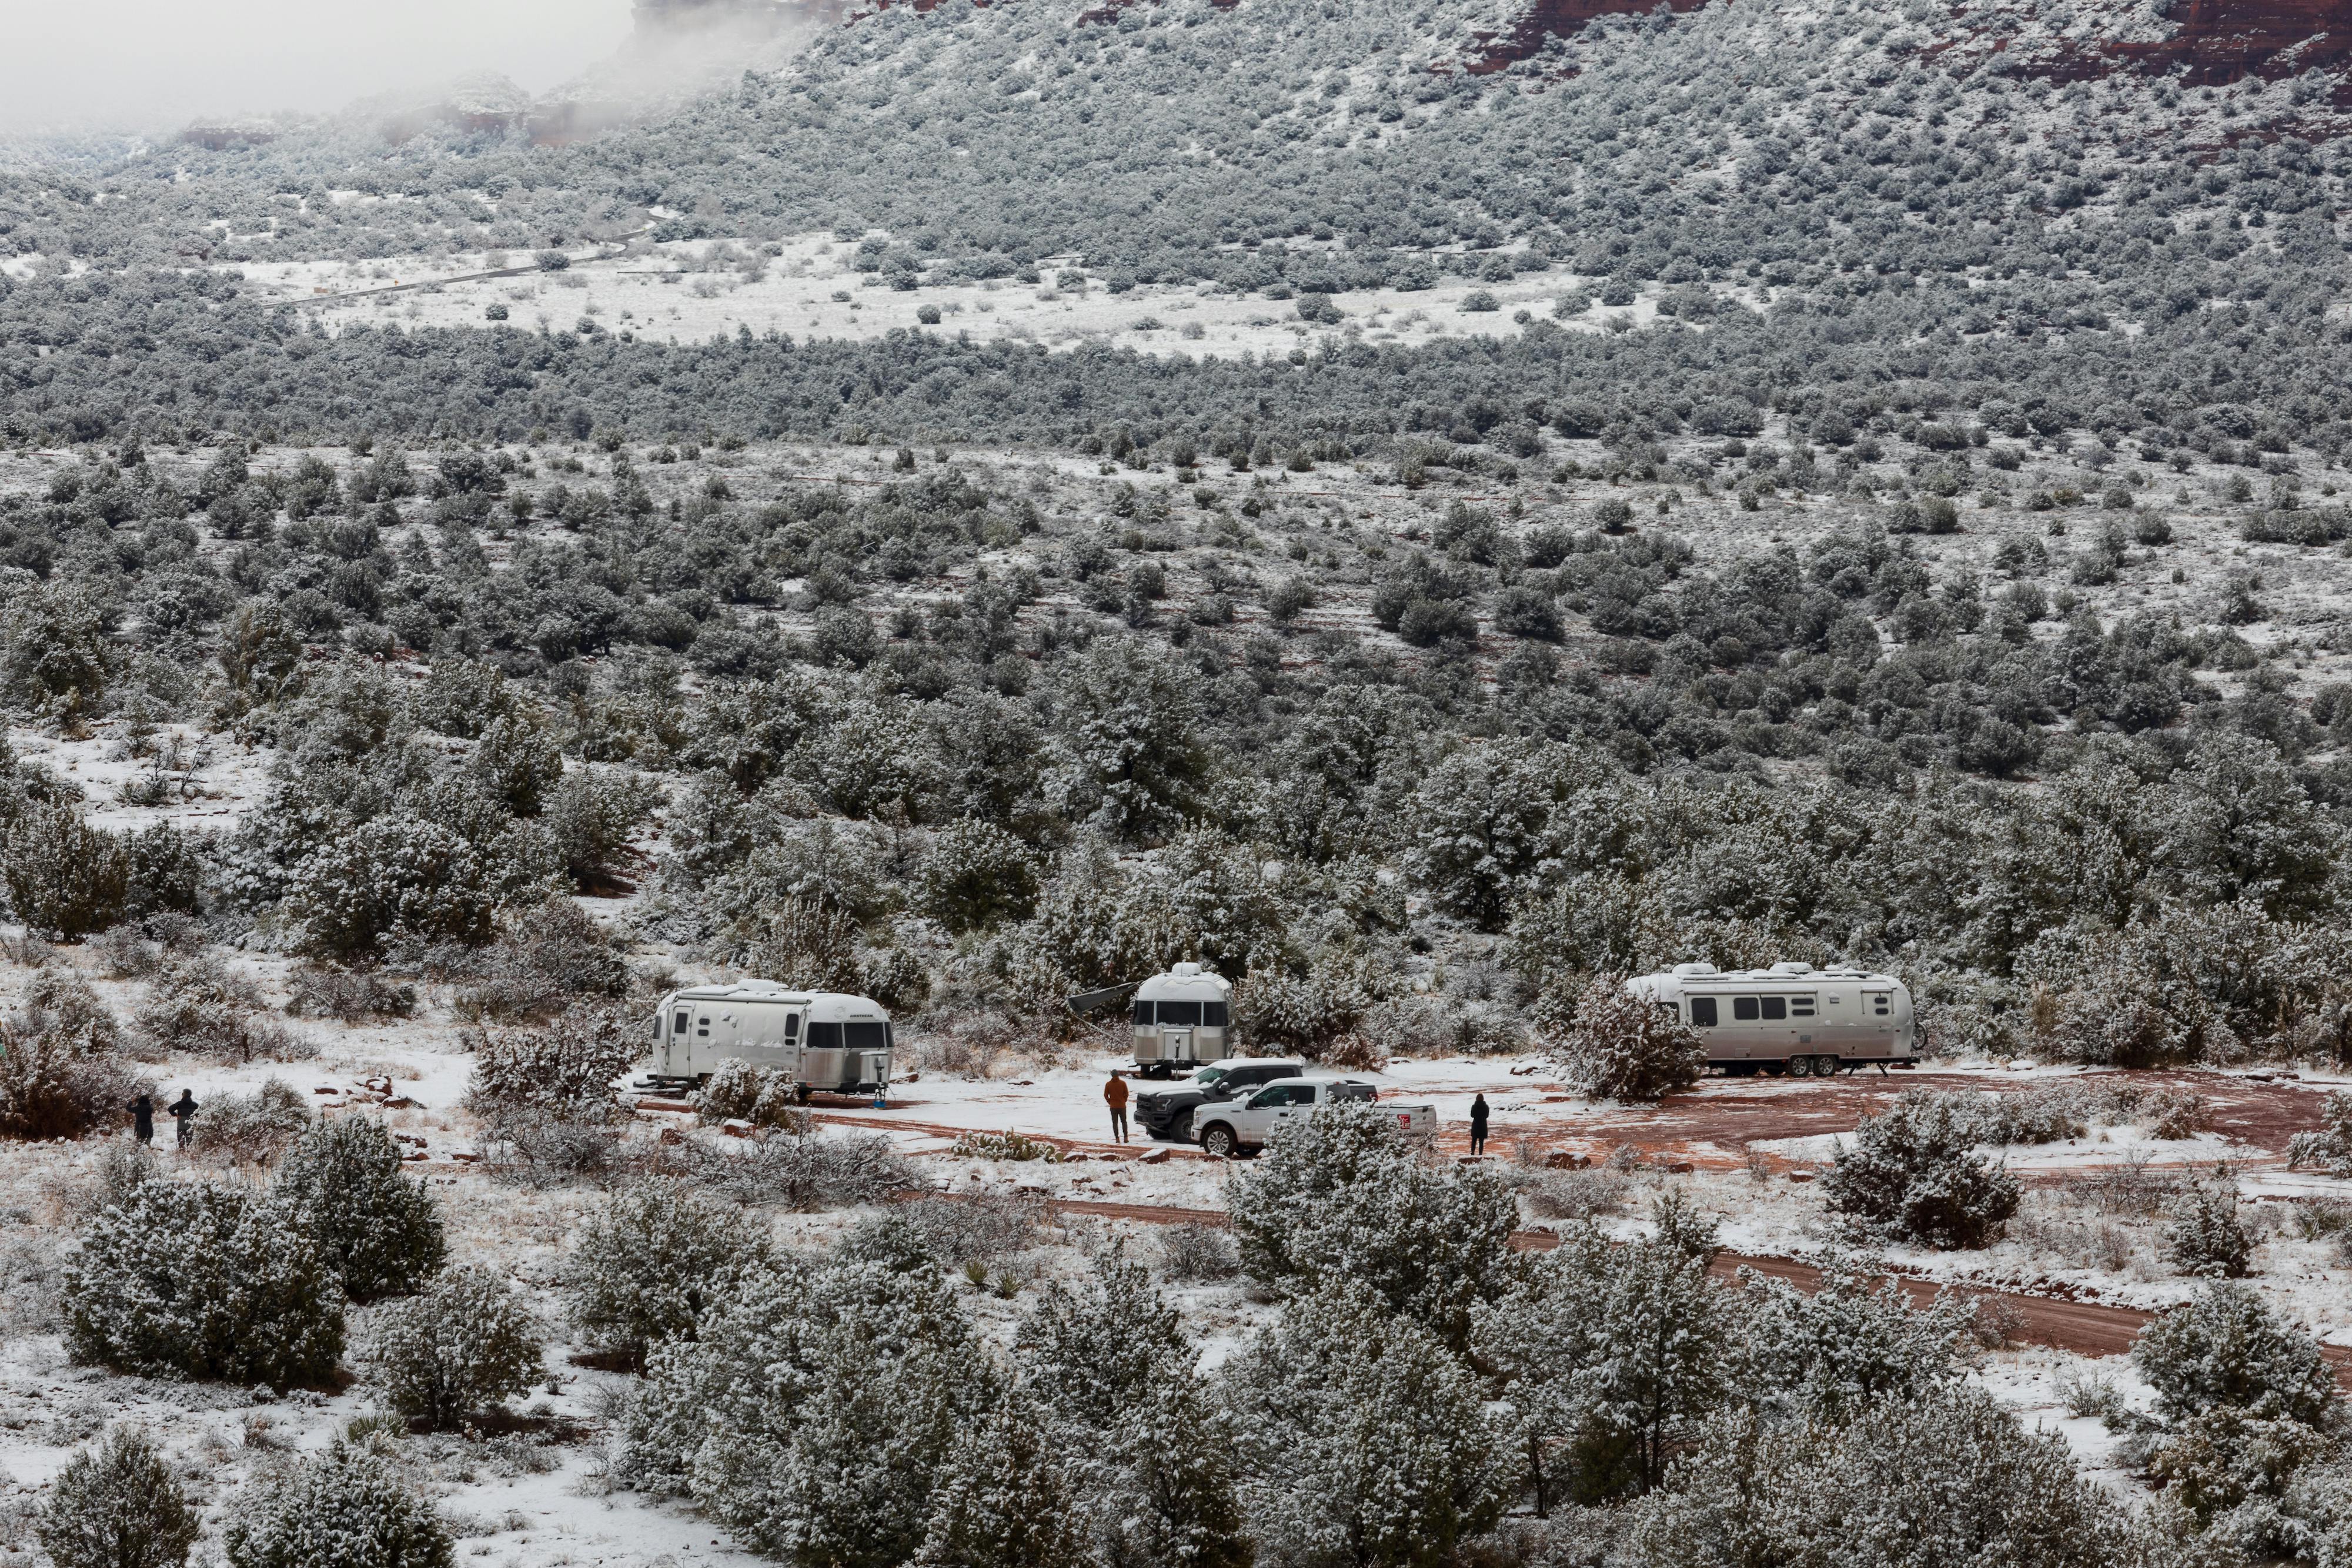 Karen Blue's Airstream camping with other Airstreamers in a snowy desert